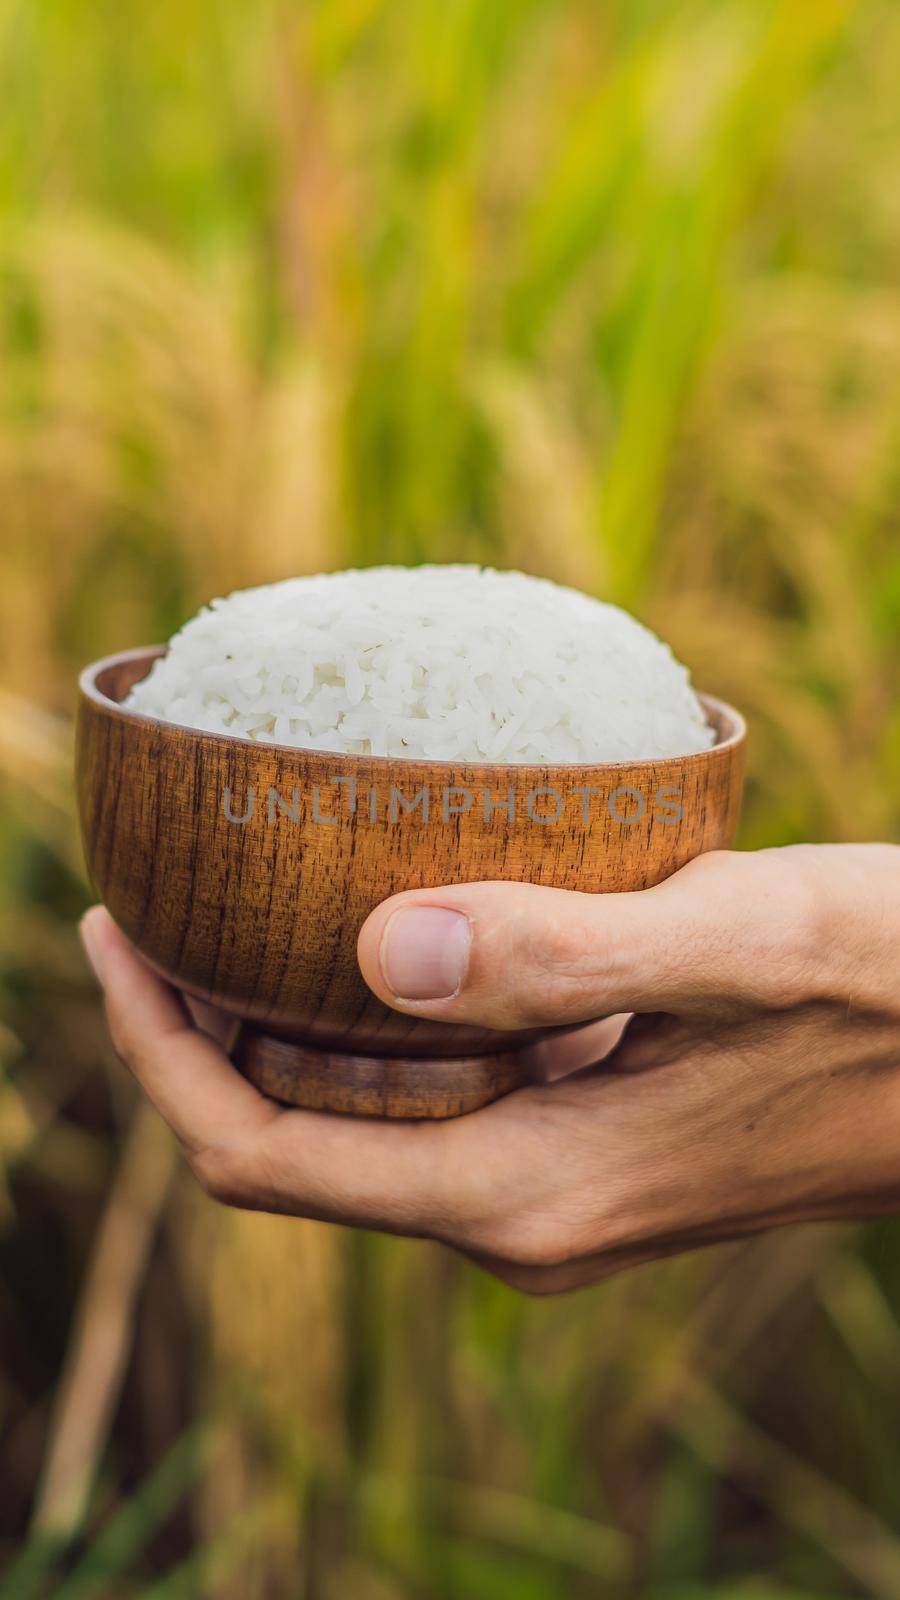 The hand holds a cup of boiled rice in a wooden cup, against the background of a ripe rice field VERTICAL FORMAT for Instagram mobile story or stories size. Mobile wallpaper by galitskaya